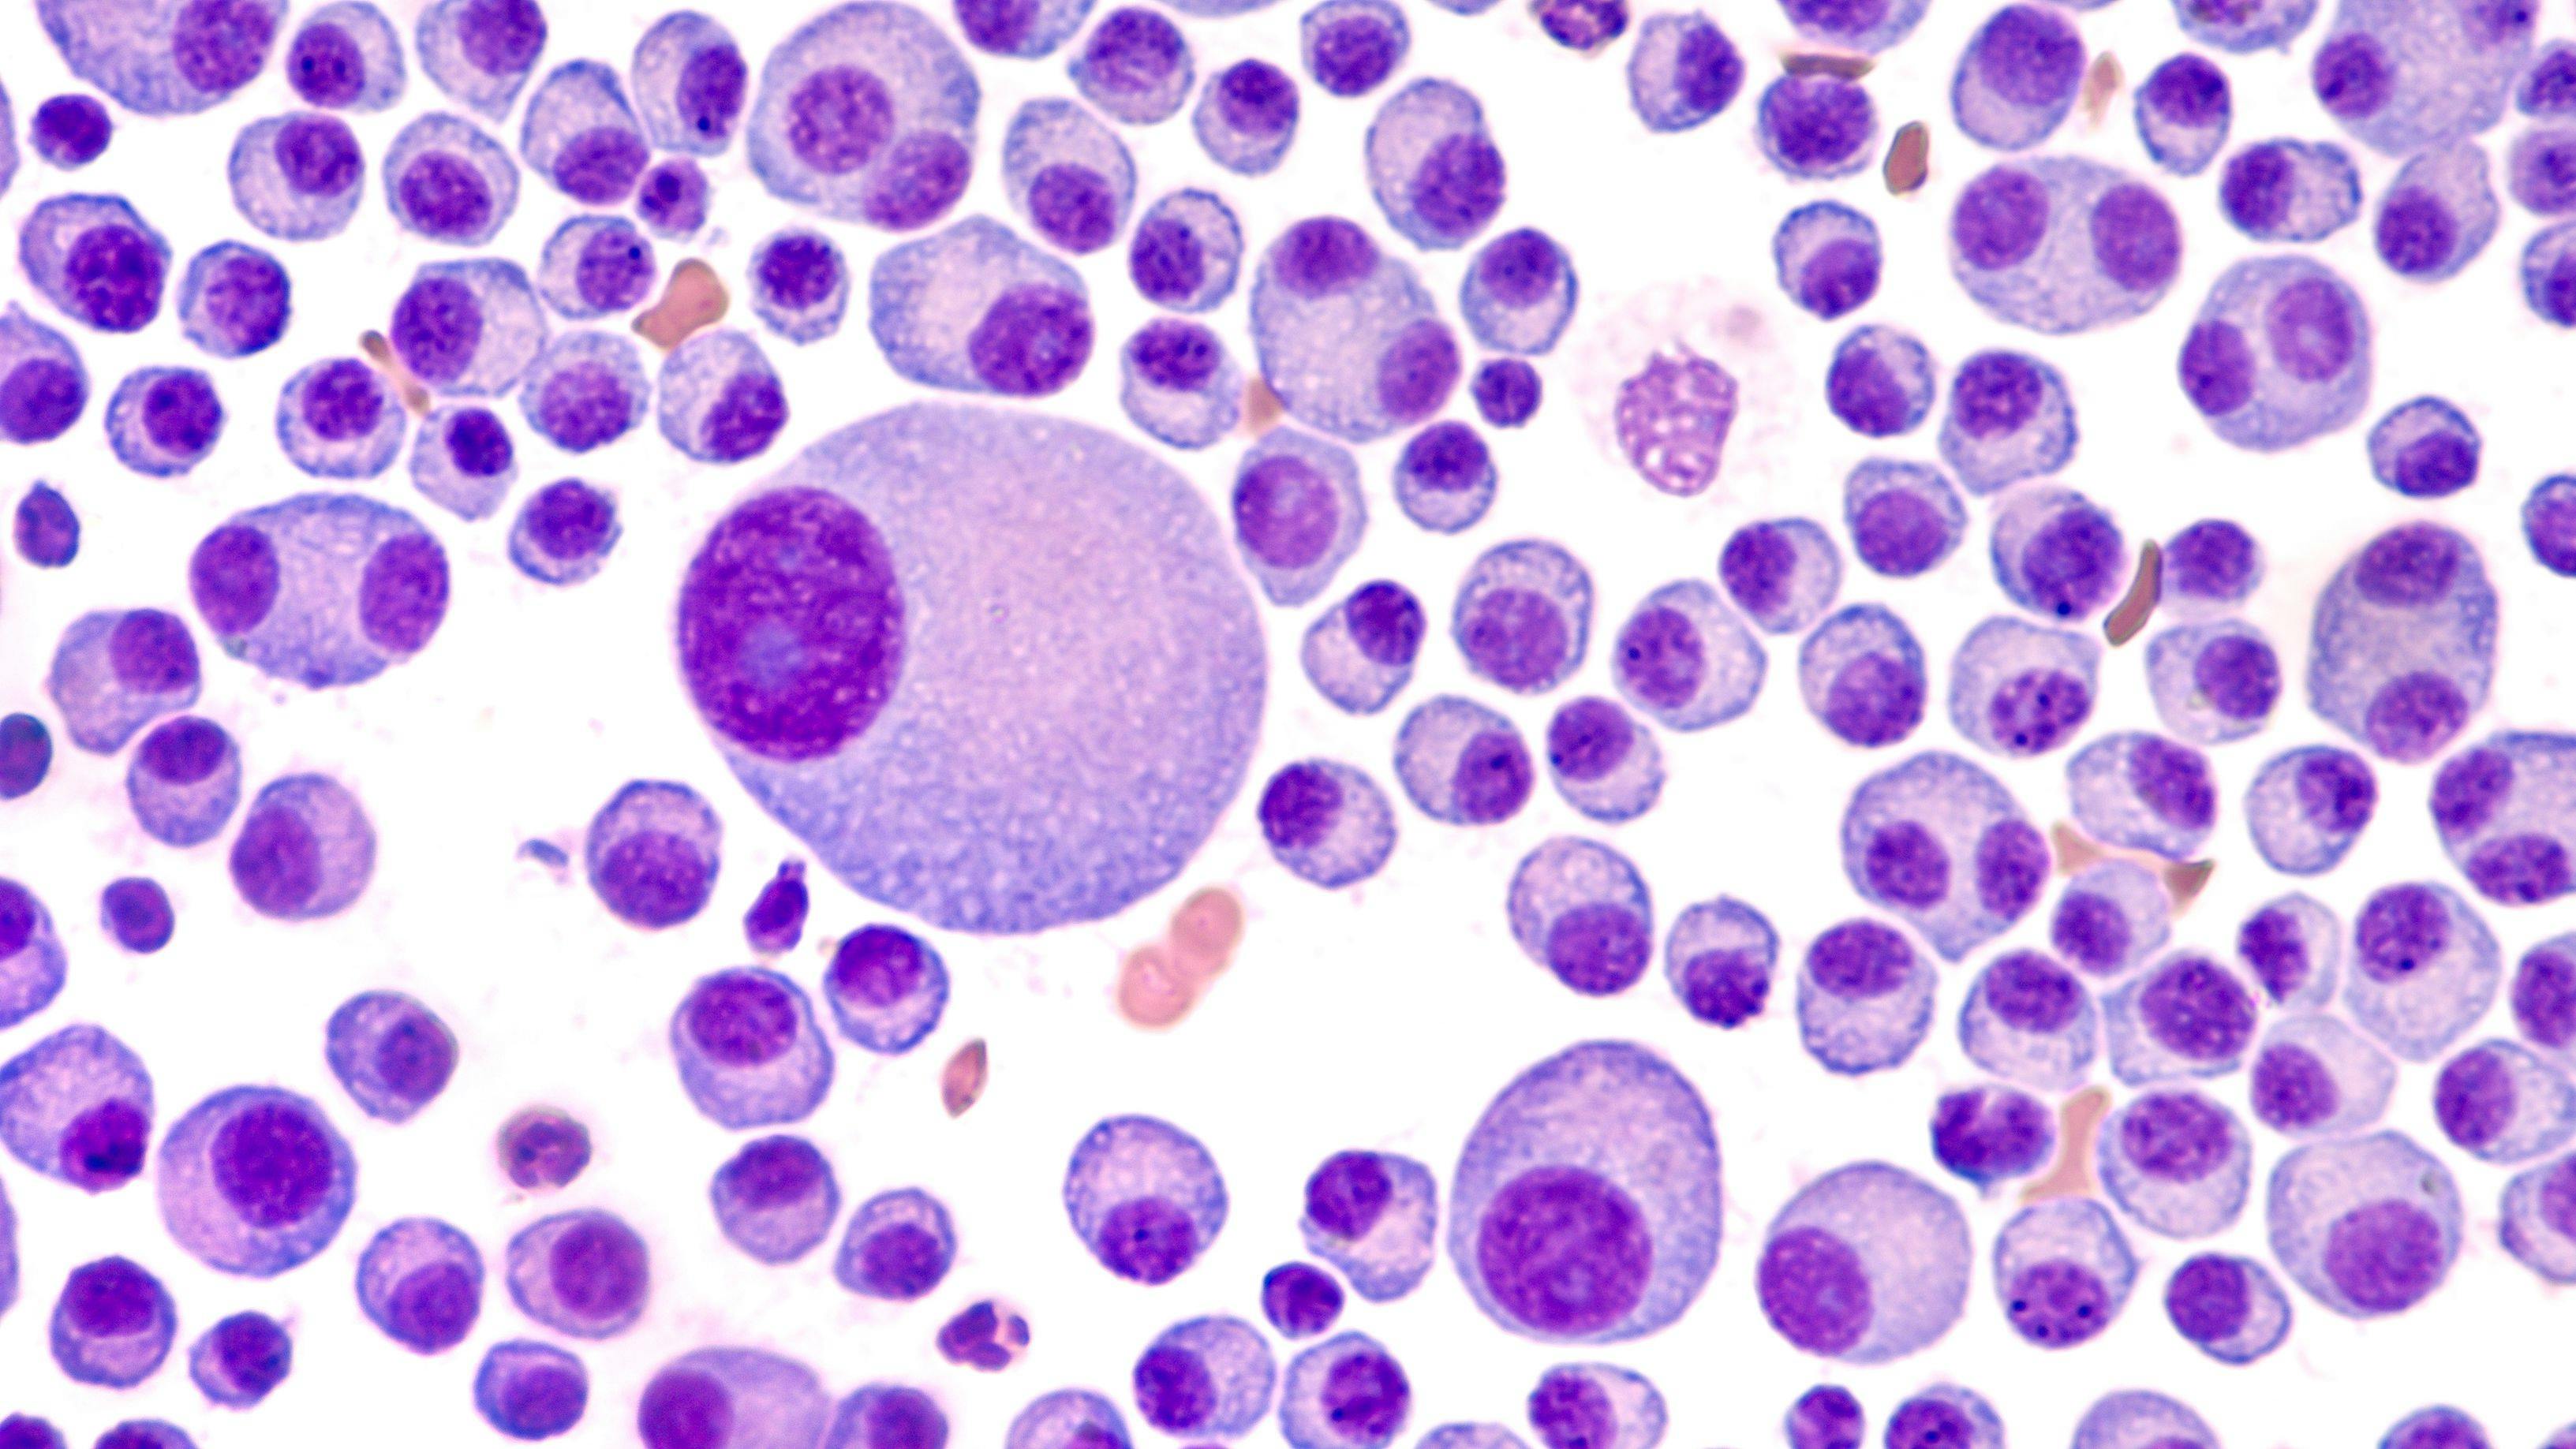 Cilta-Cel Shows Durability in Relapsed/Refractory Multiple Myeloma